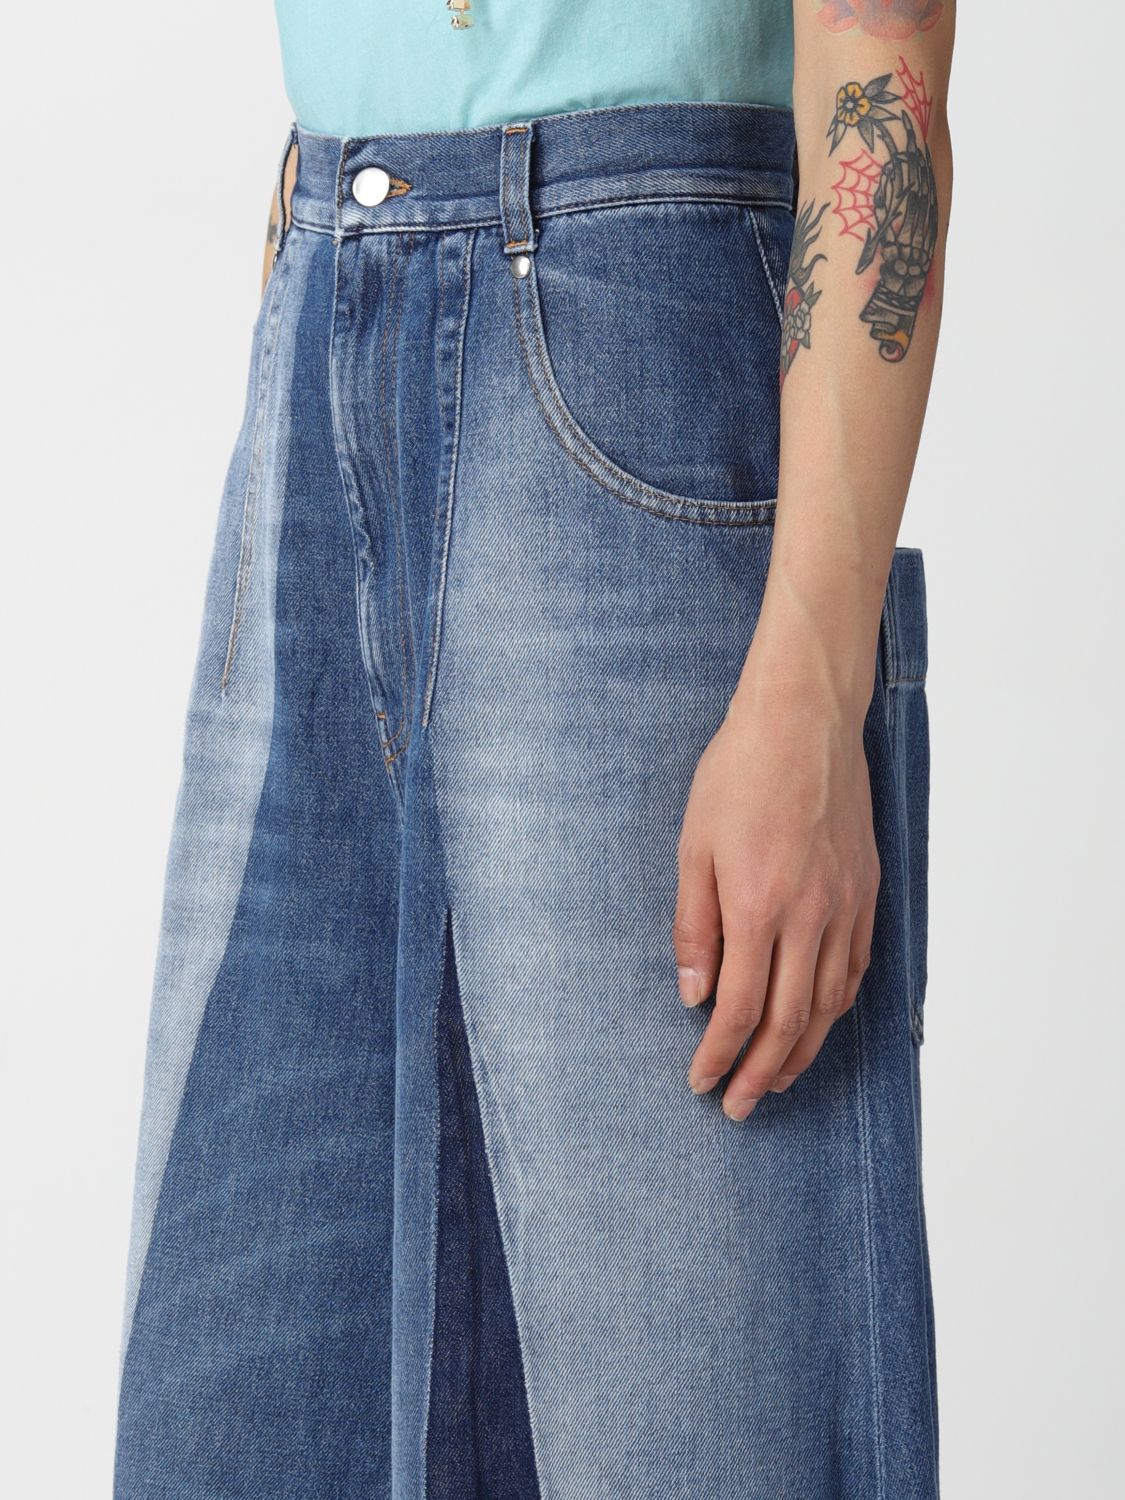 Jeans Circus Hotel: Jeans cropped Circus Hotel in denim washed denim 3